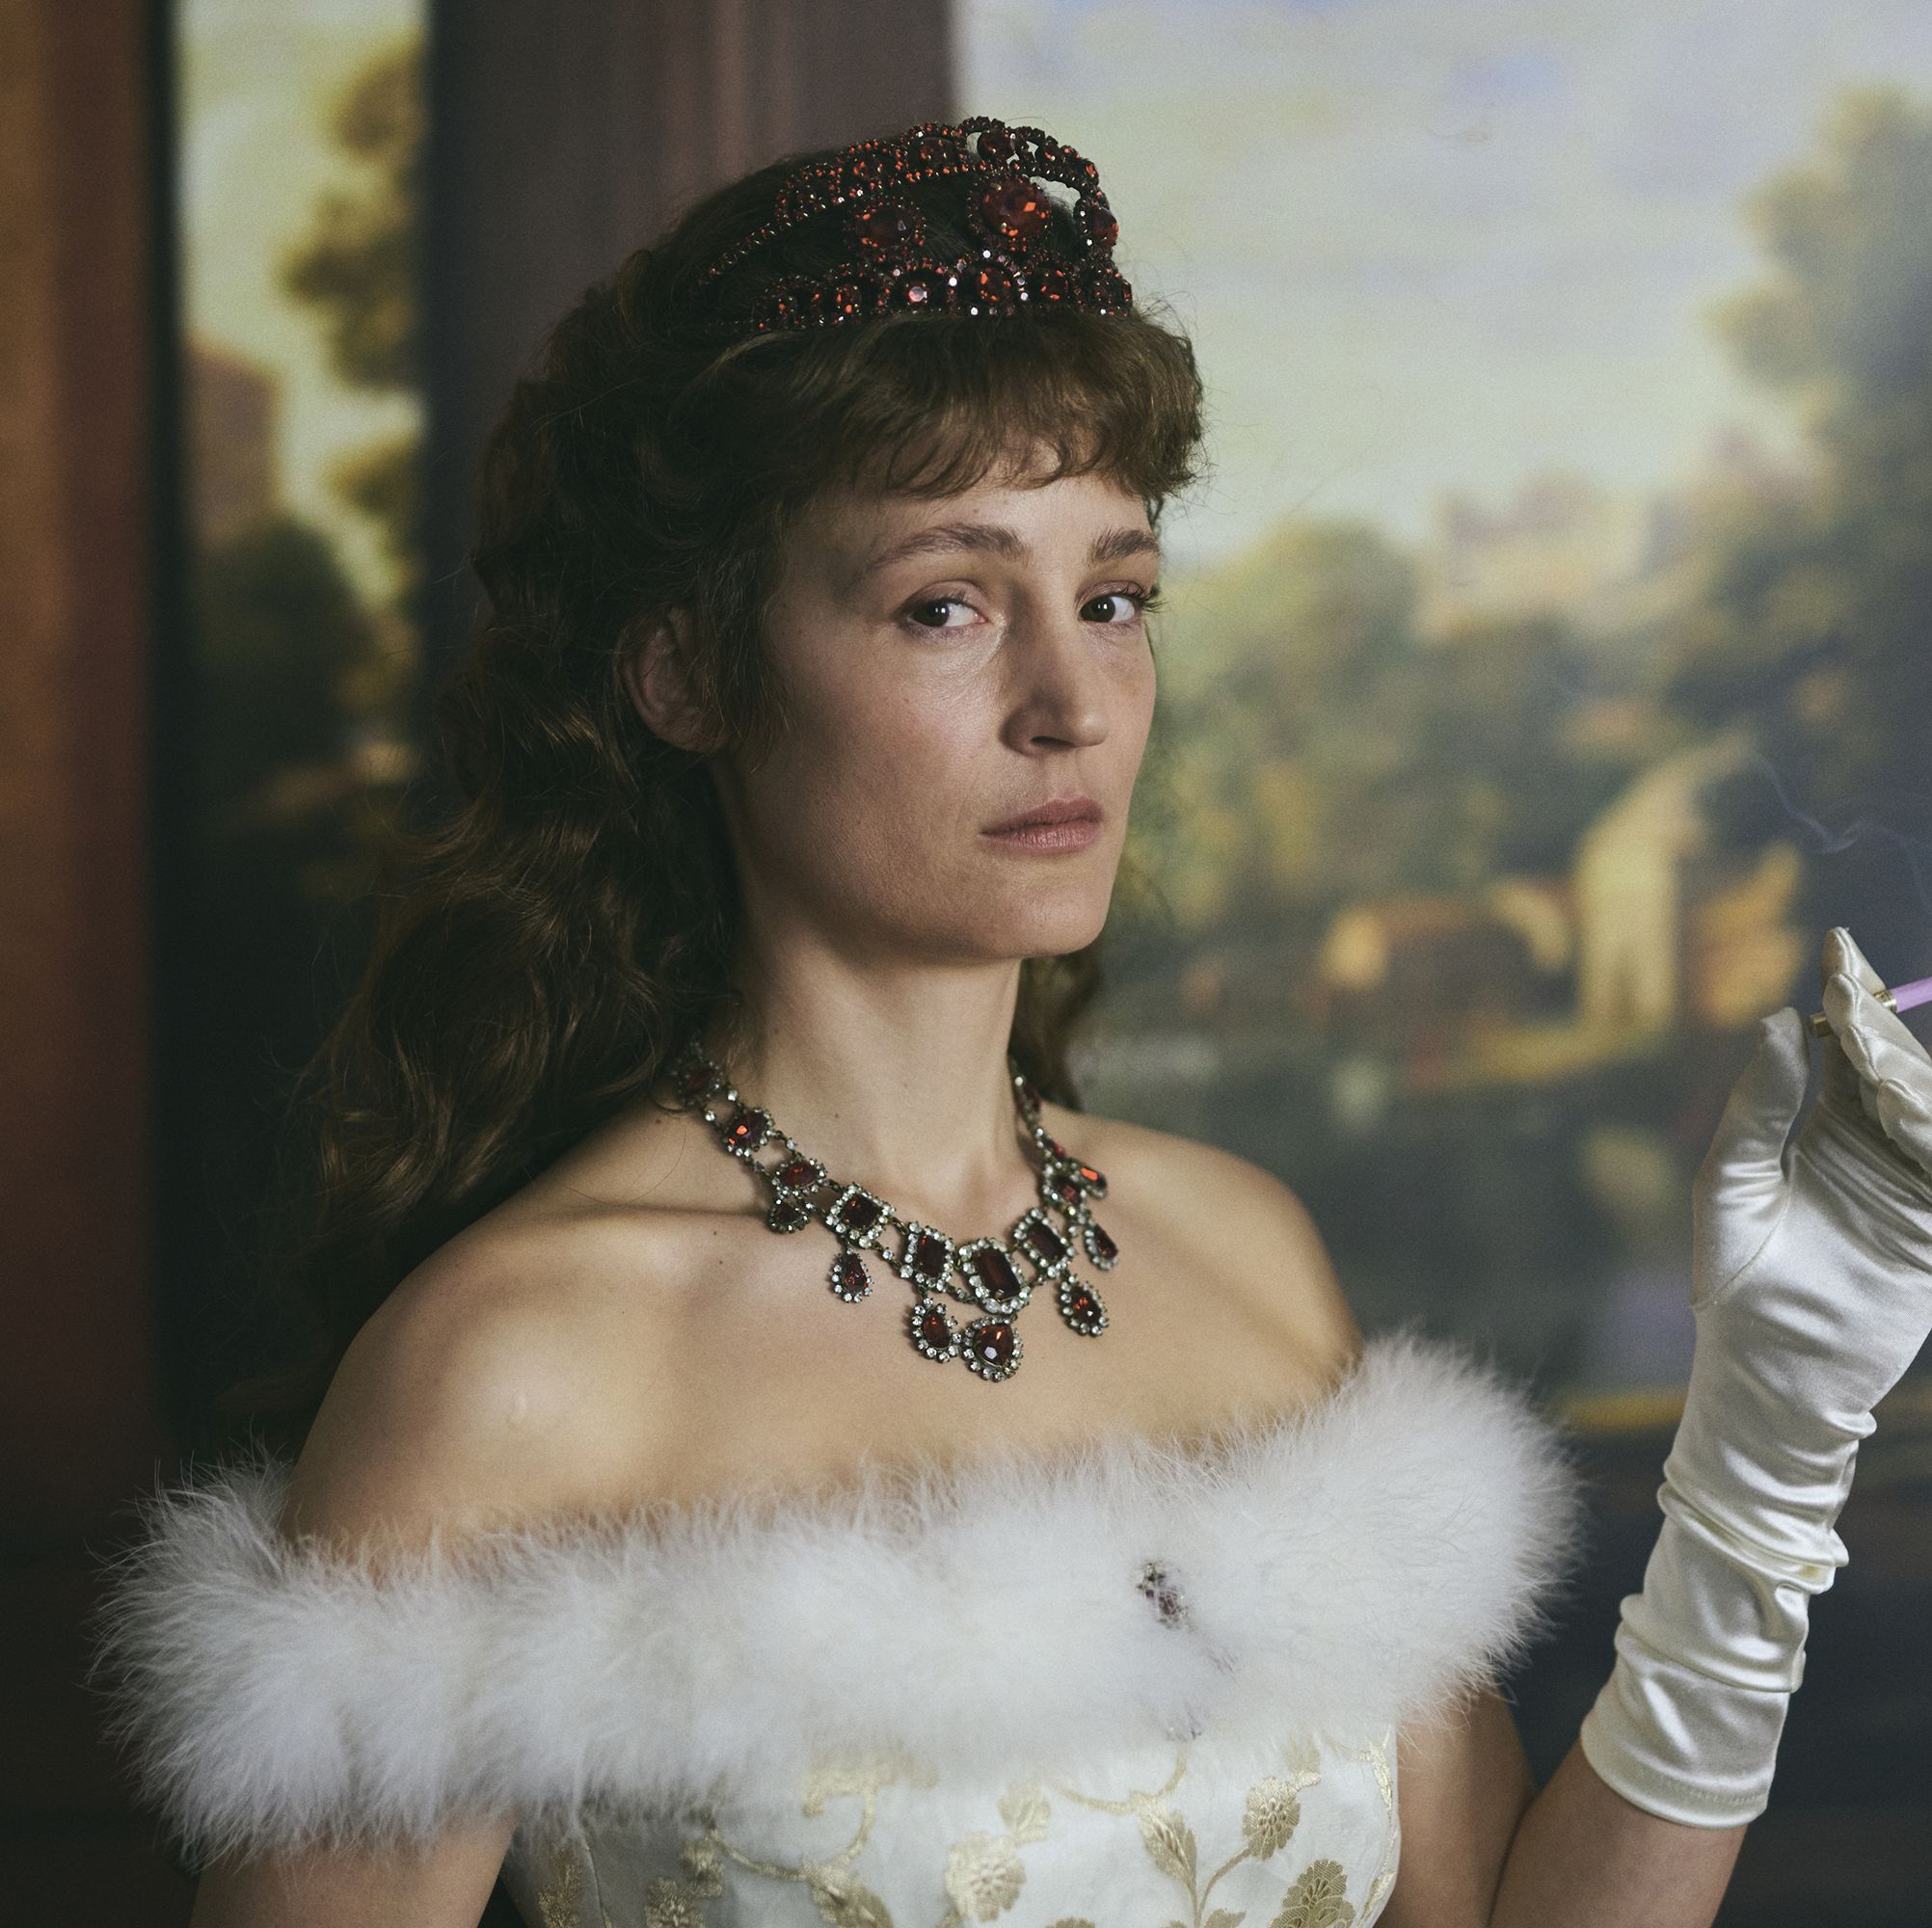 Marie Kreutzer’s new film about the rebellious Empress Elisabeth of Austria has timely messages about women aging and defying the expectations thrust upon them. 